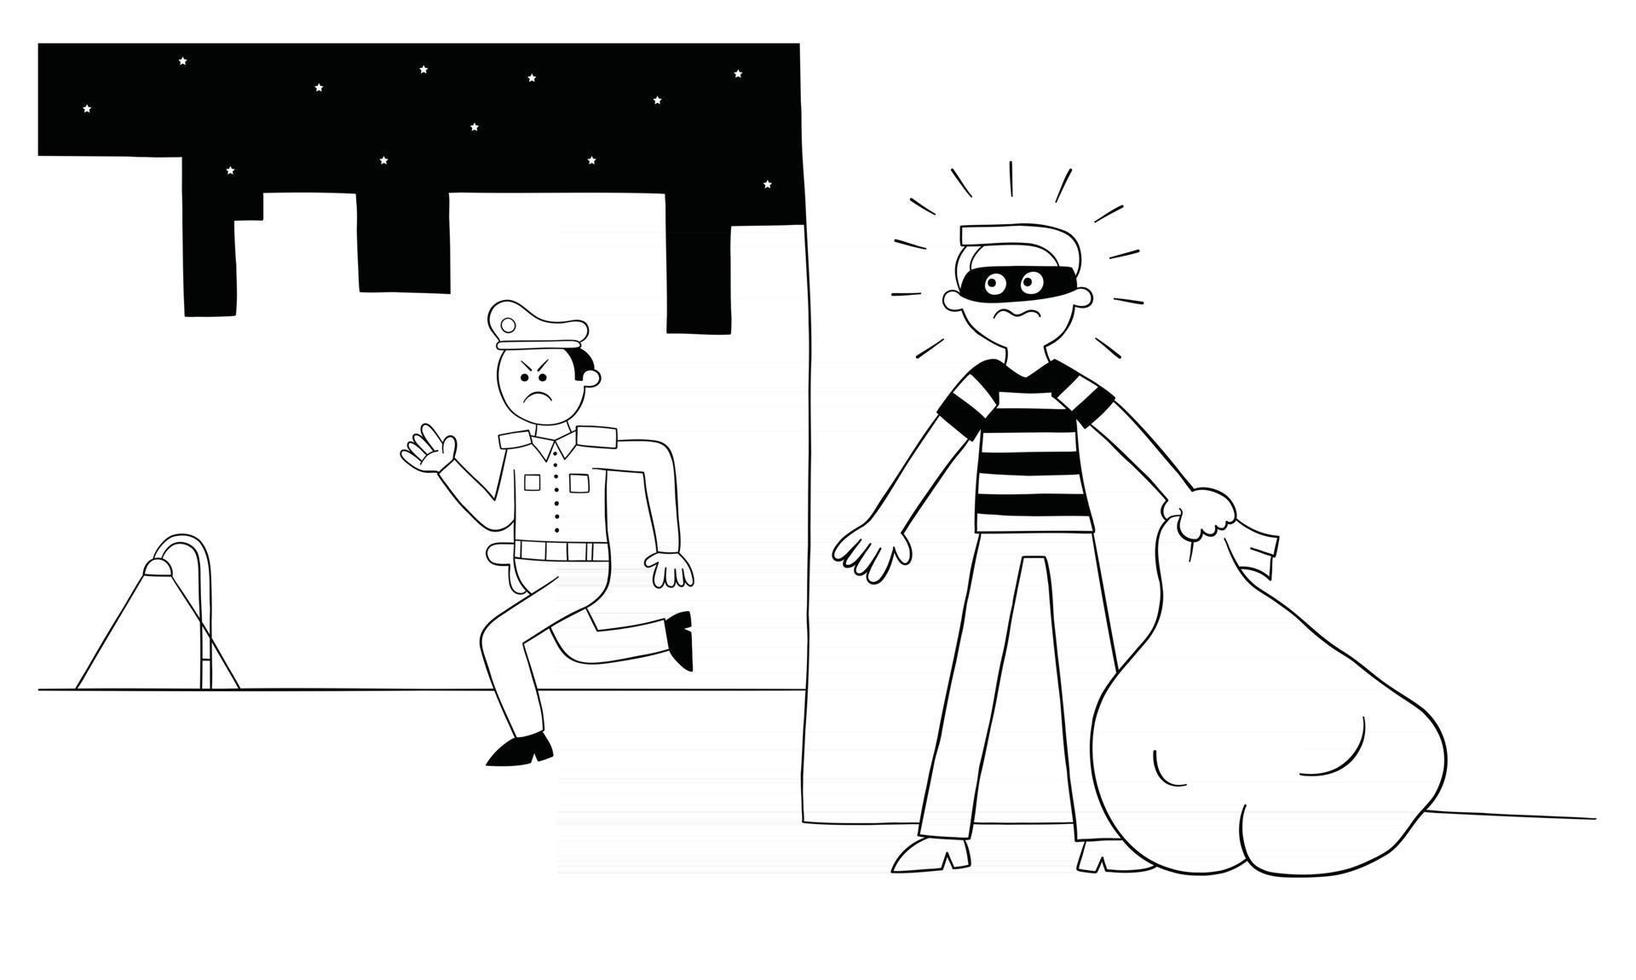 https://static.vecteezy.com/system/resources/previews/002/780/038/non_2x/cartoon-thief-man-is-hiding-behind-the-wall-the-police-are-looking-for-him-illustration-free-vector.jpg